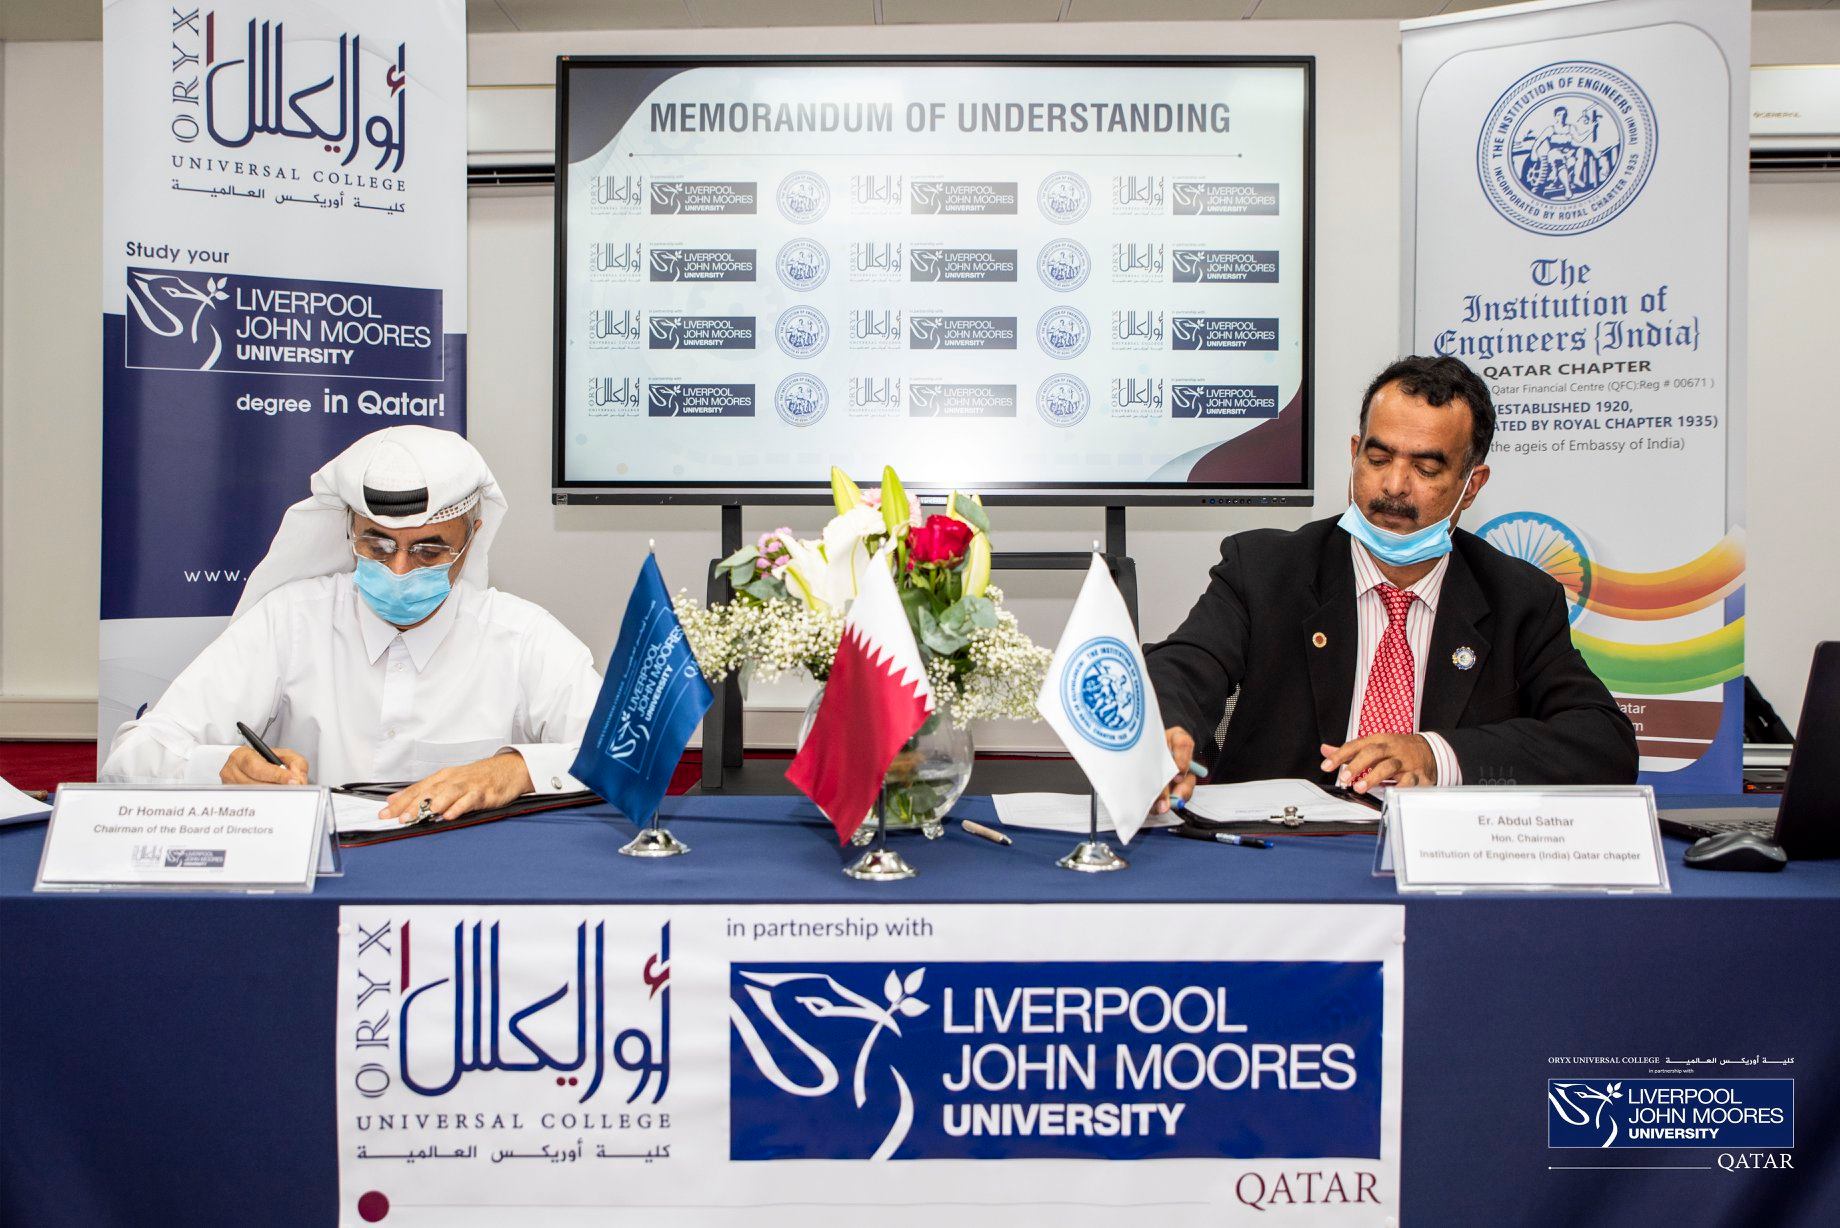 MOU signed between IEI Qatar Chapter, Liverpool John Moores University and Oryx Universal College, Qatar